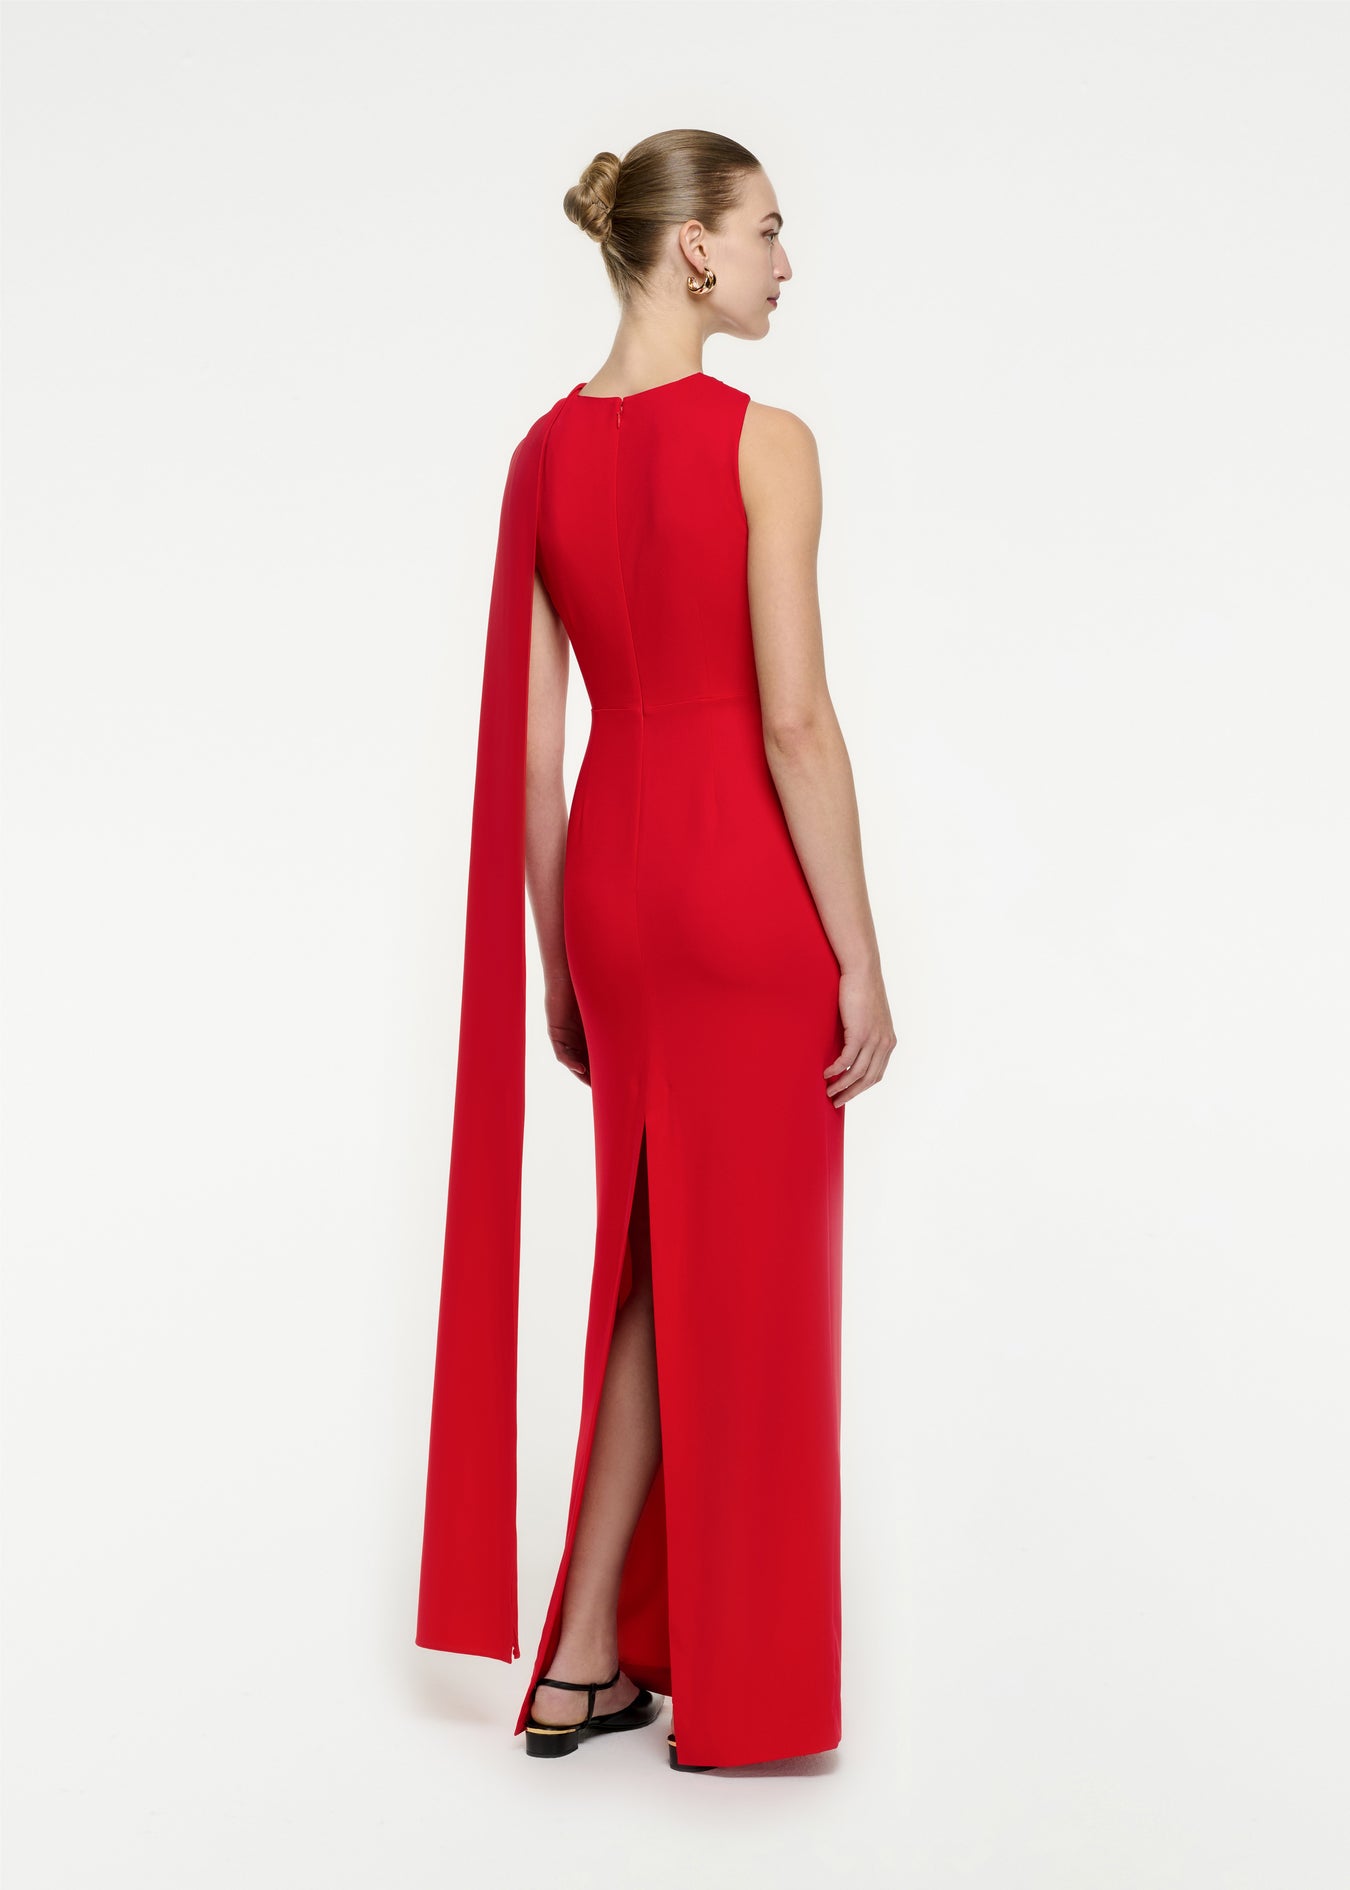 The back of a woman wearing the Asymmetric Stretch Cady Maxi Dress in Red